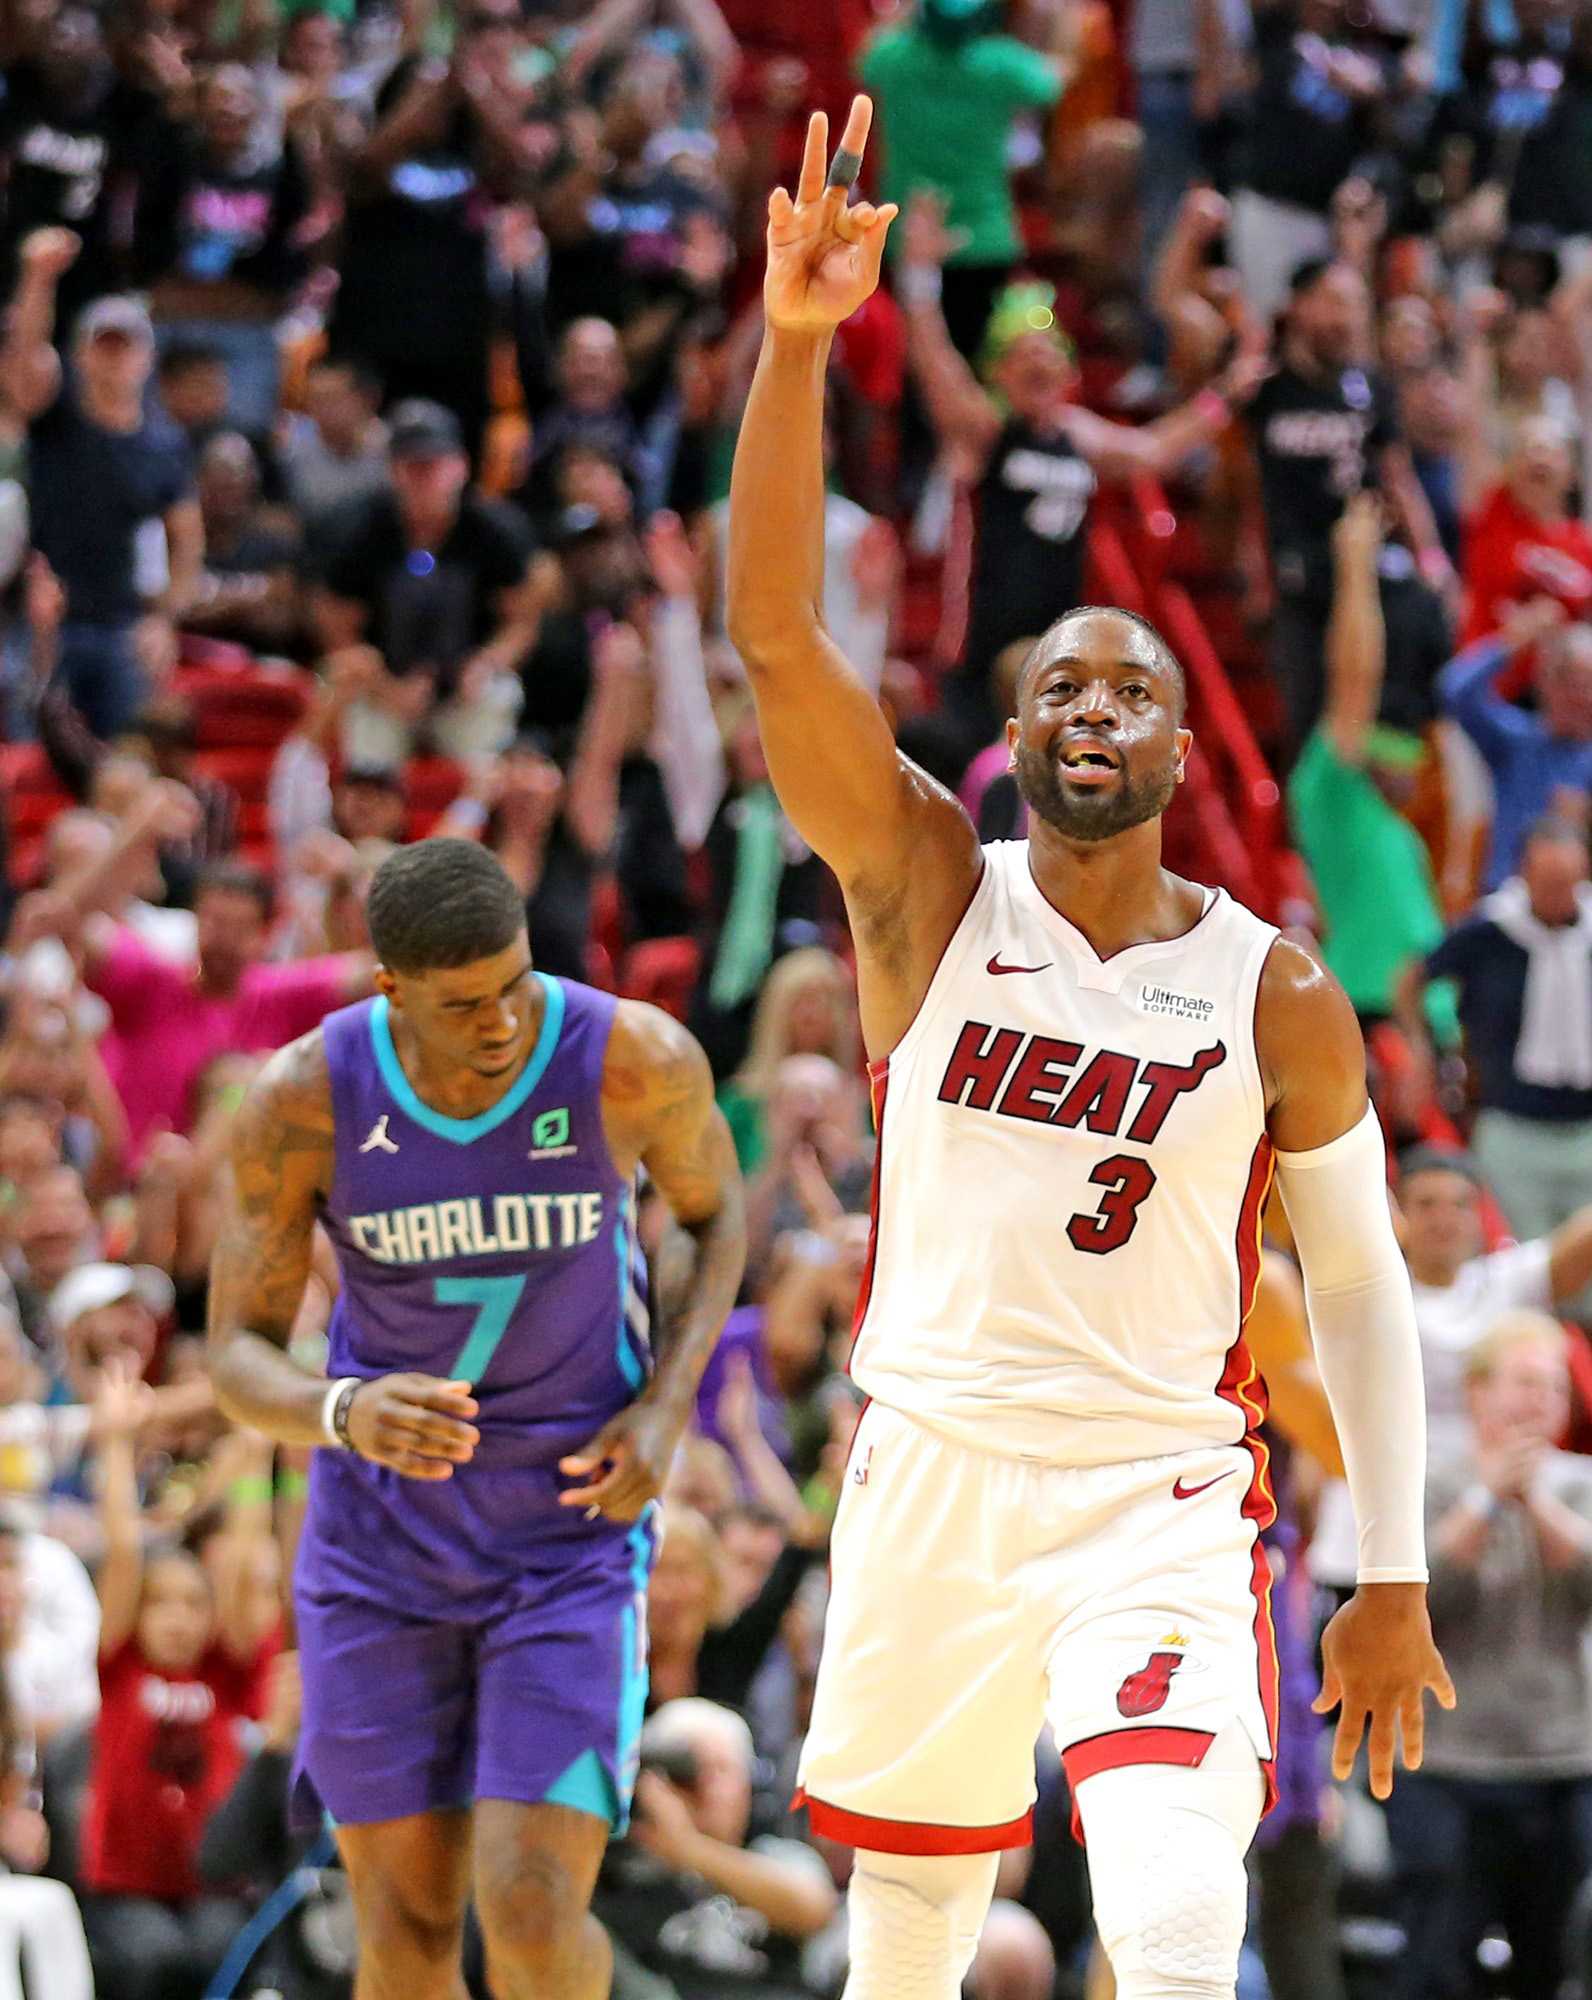 Miami Heats Dwayne Wade signals his three-pointer in the fourth quarter against the Charlotte Hornets on Sunday, March, 17, 2019 at the AmericanAirlines Arena in Miami, Fla. (Charles Trainor Jr./Miami Herald/TNS)